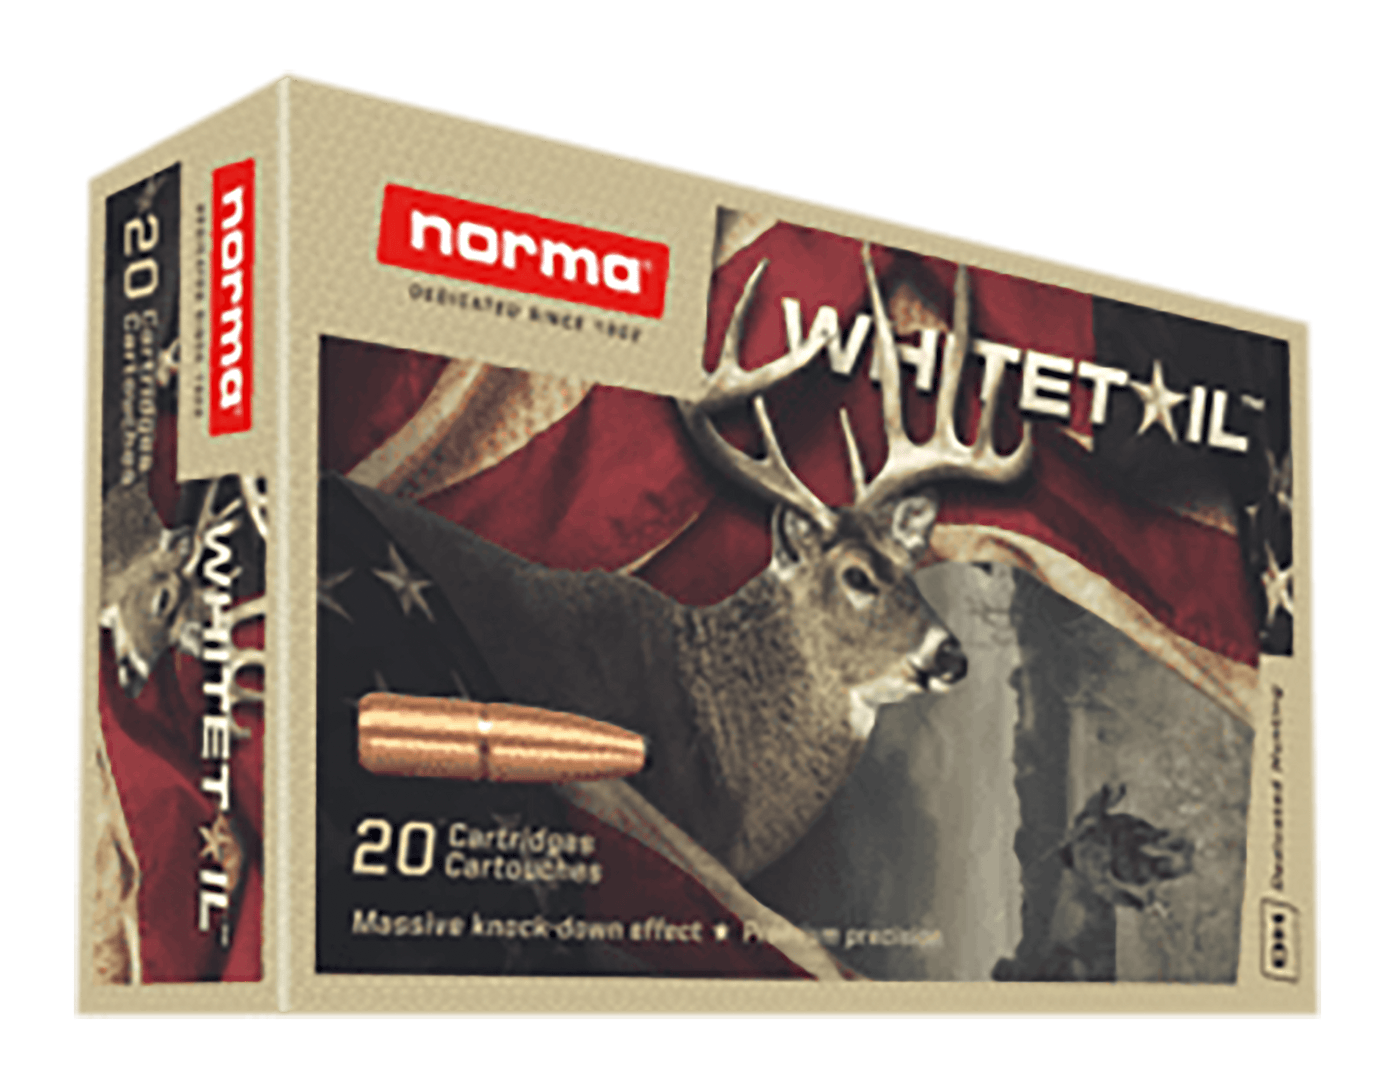 NORMA AMMUNITION (RUAG) Norma Ammunition (ruag) Whitetail, Norma 20160462 243 Win 100gr Psp Whitetail   20/10 Ammo